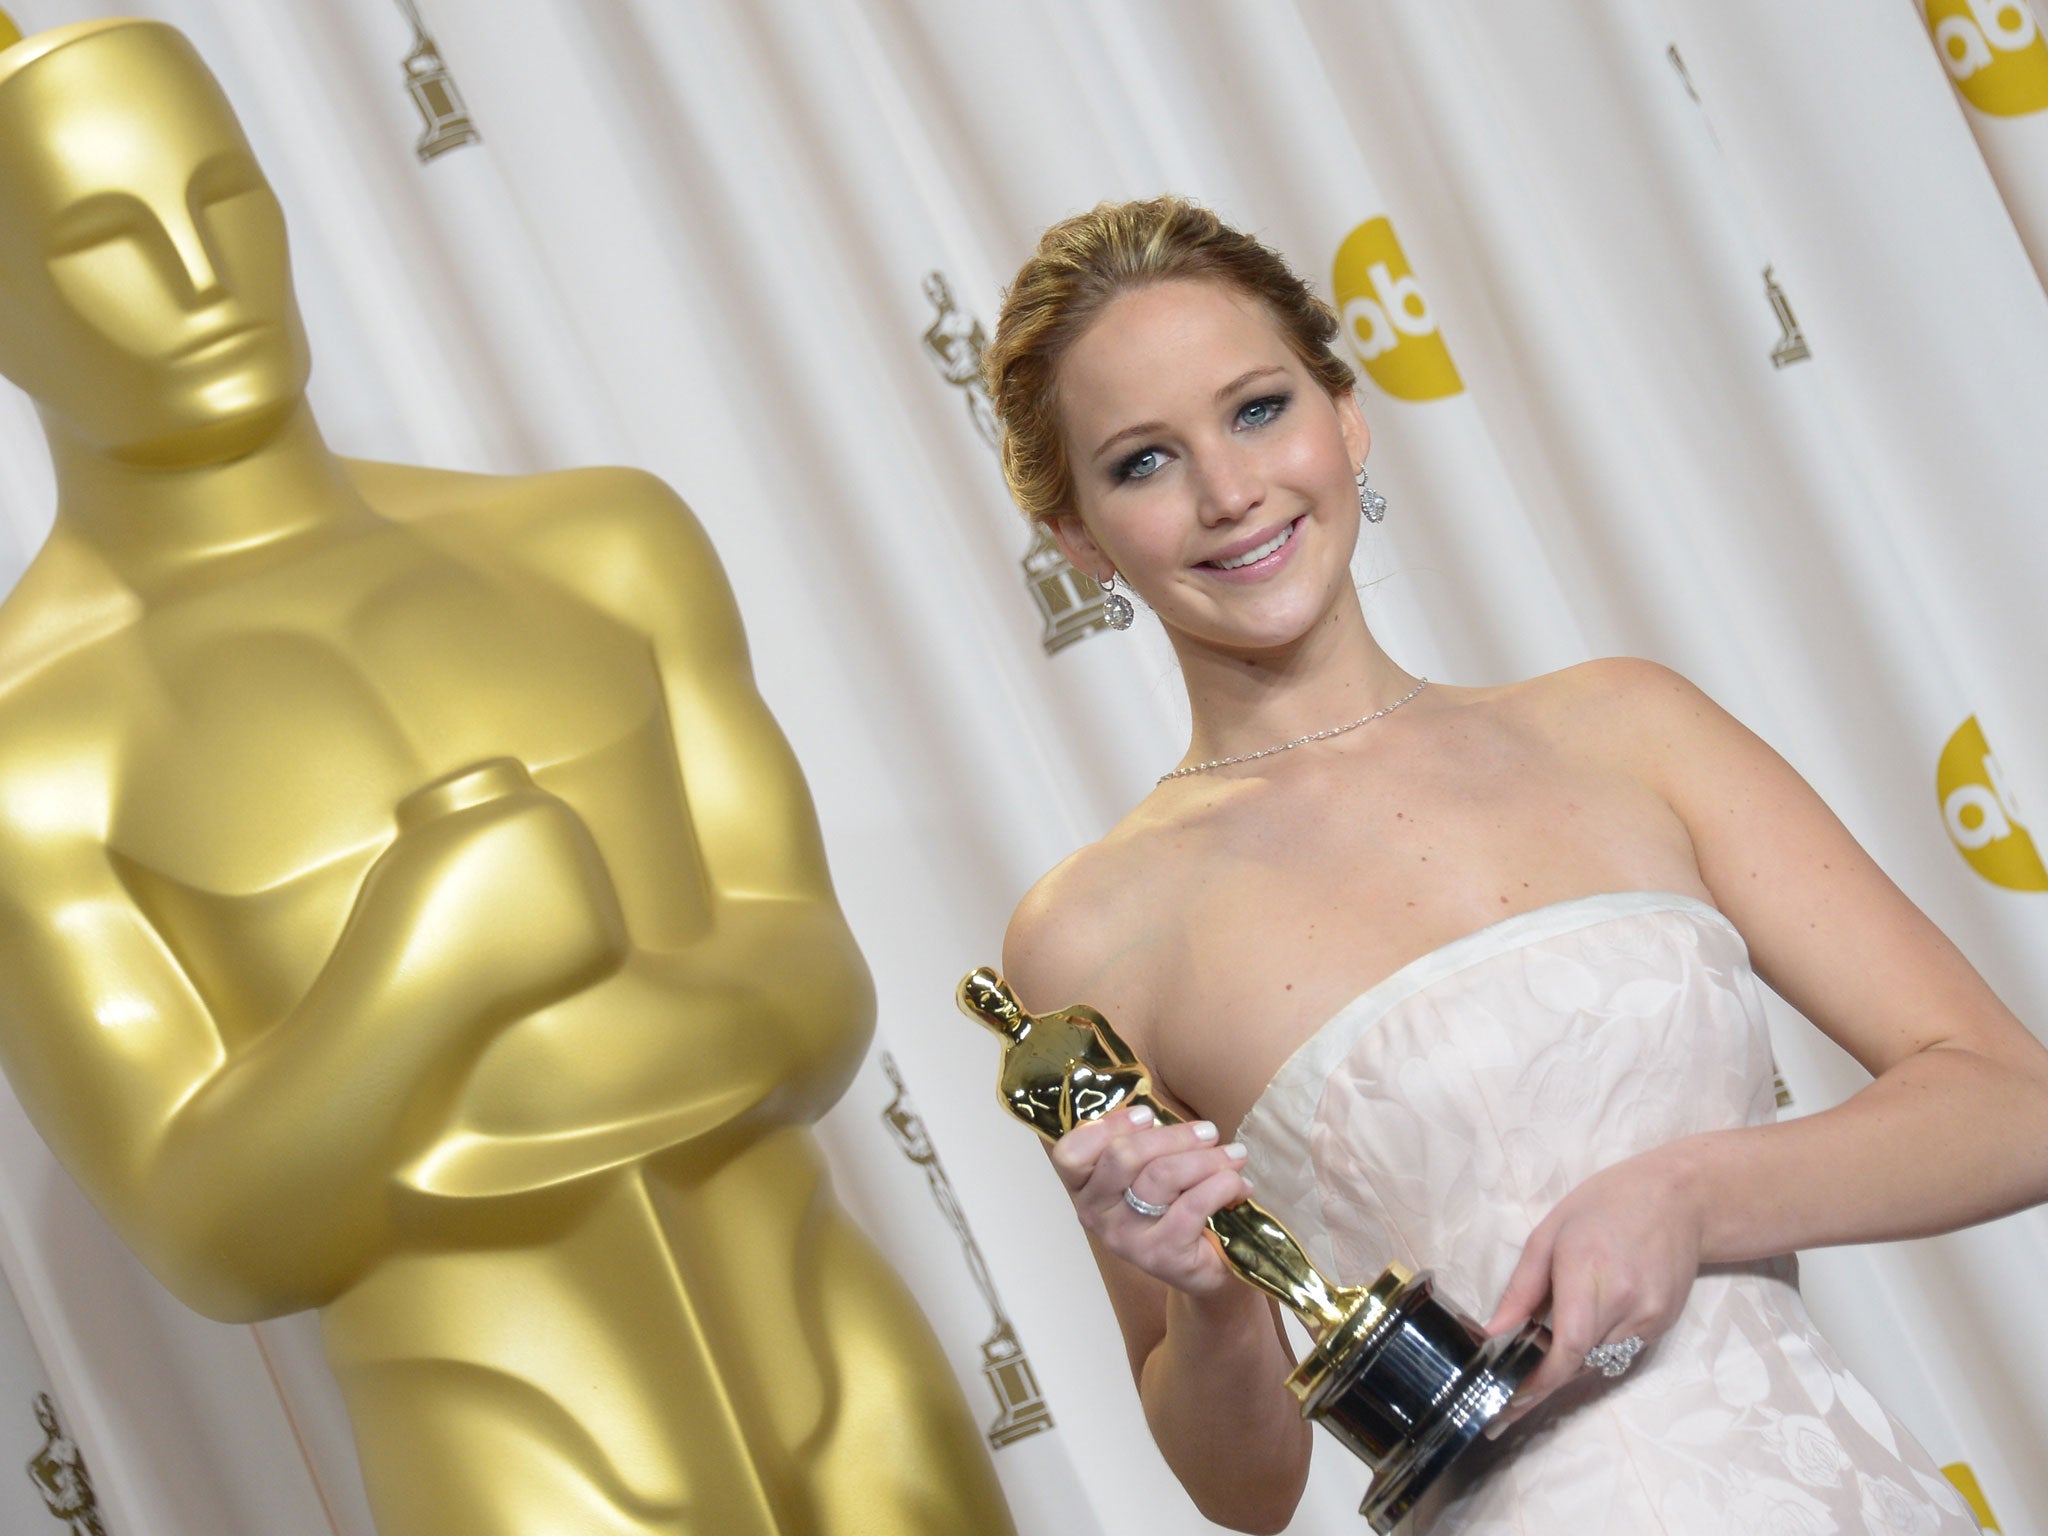 Jennifer Lawrence poses with her award after winning Best Actress for Silver Linings Playbook at the 2013 Oscars